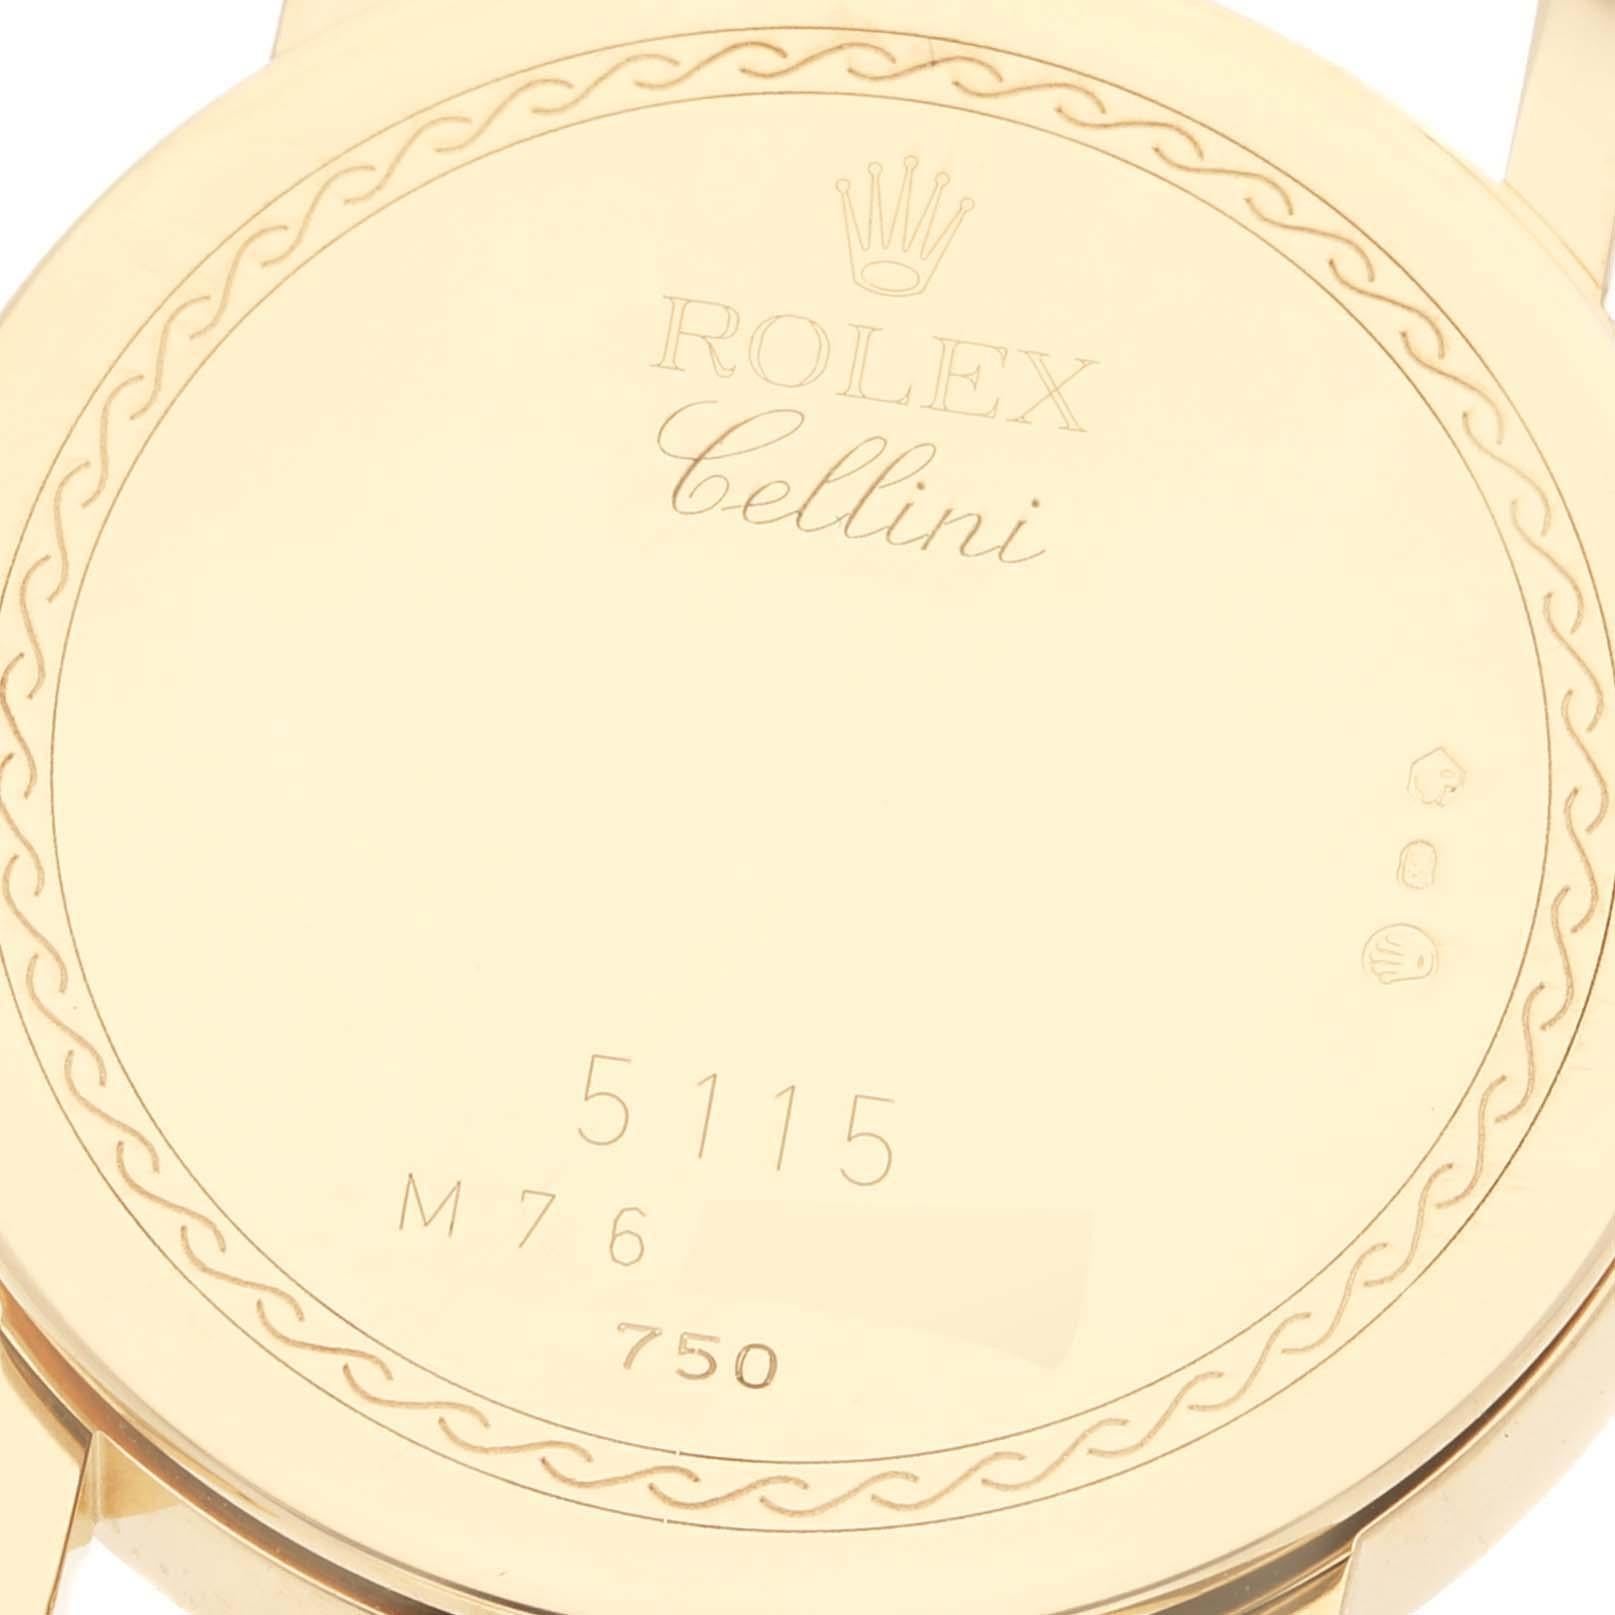 Rolex Cellini Classic Yellow Gold Ivory Anniversary Dial Mens Watch 5115. Manual winding movement. 18k yellow gold slim case 32mm in diameter. 5.5mm case thickness. Rolex logo on the crown. . Scratch resistant sapphire crystal. Flat profile. Ivory